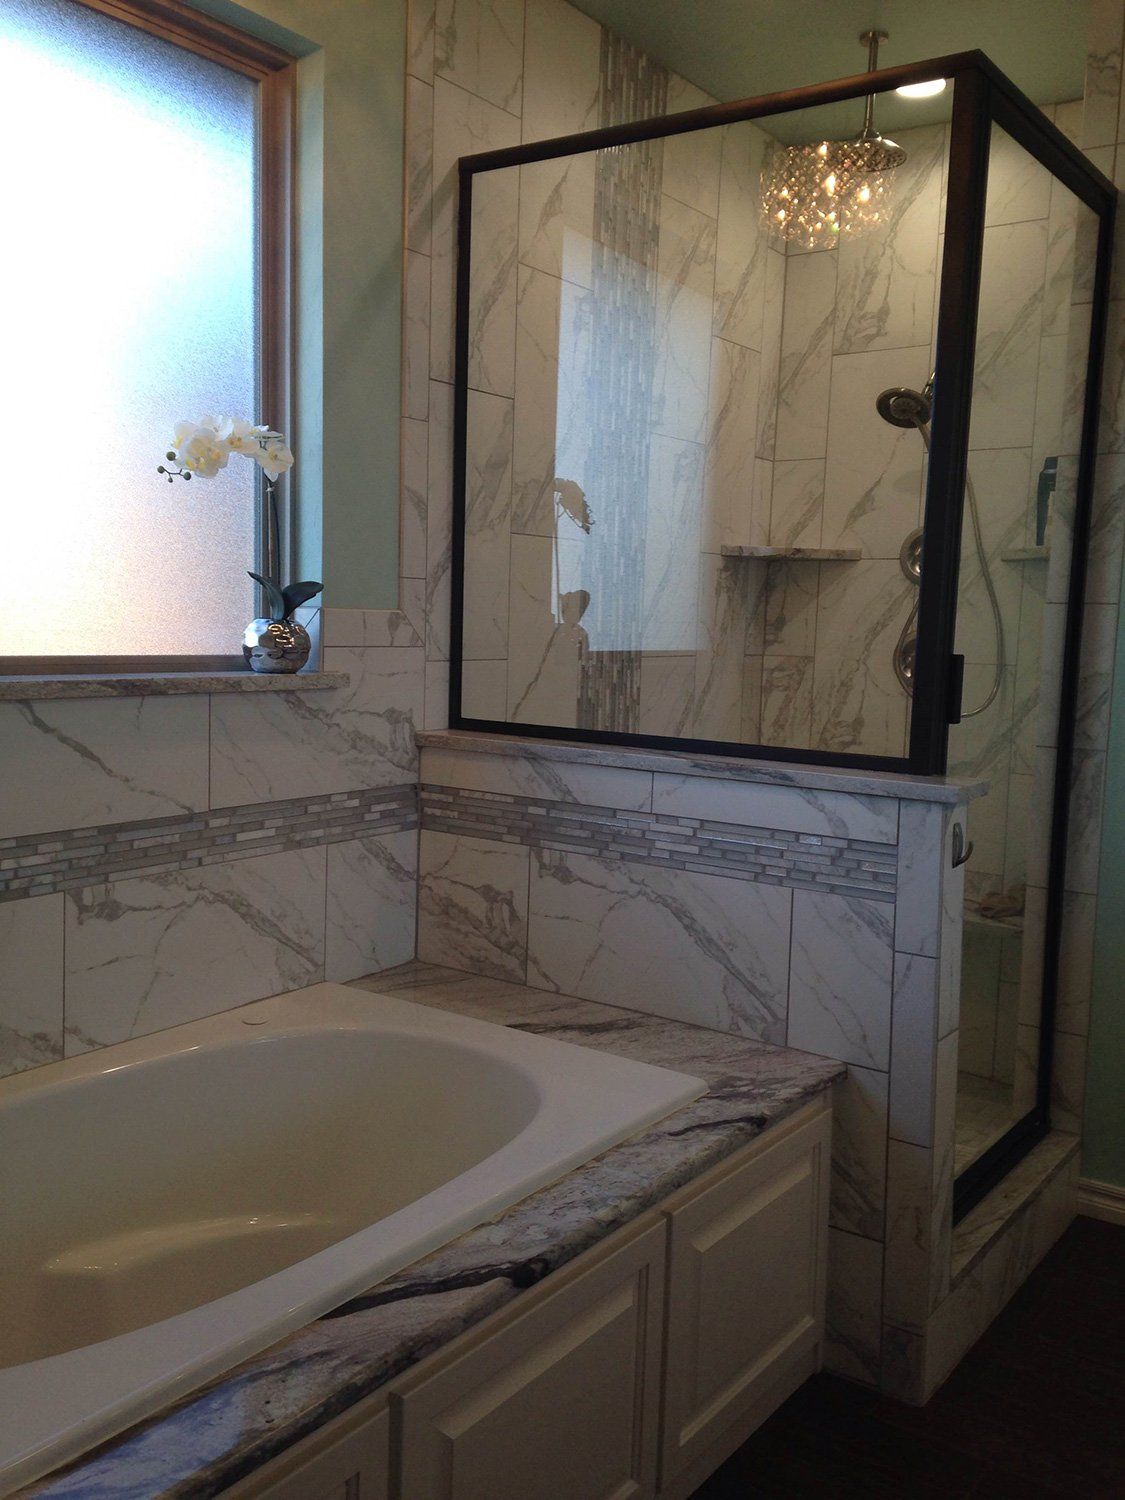 bathroom with ceramic tiles as floors and walls